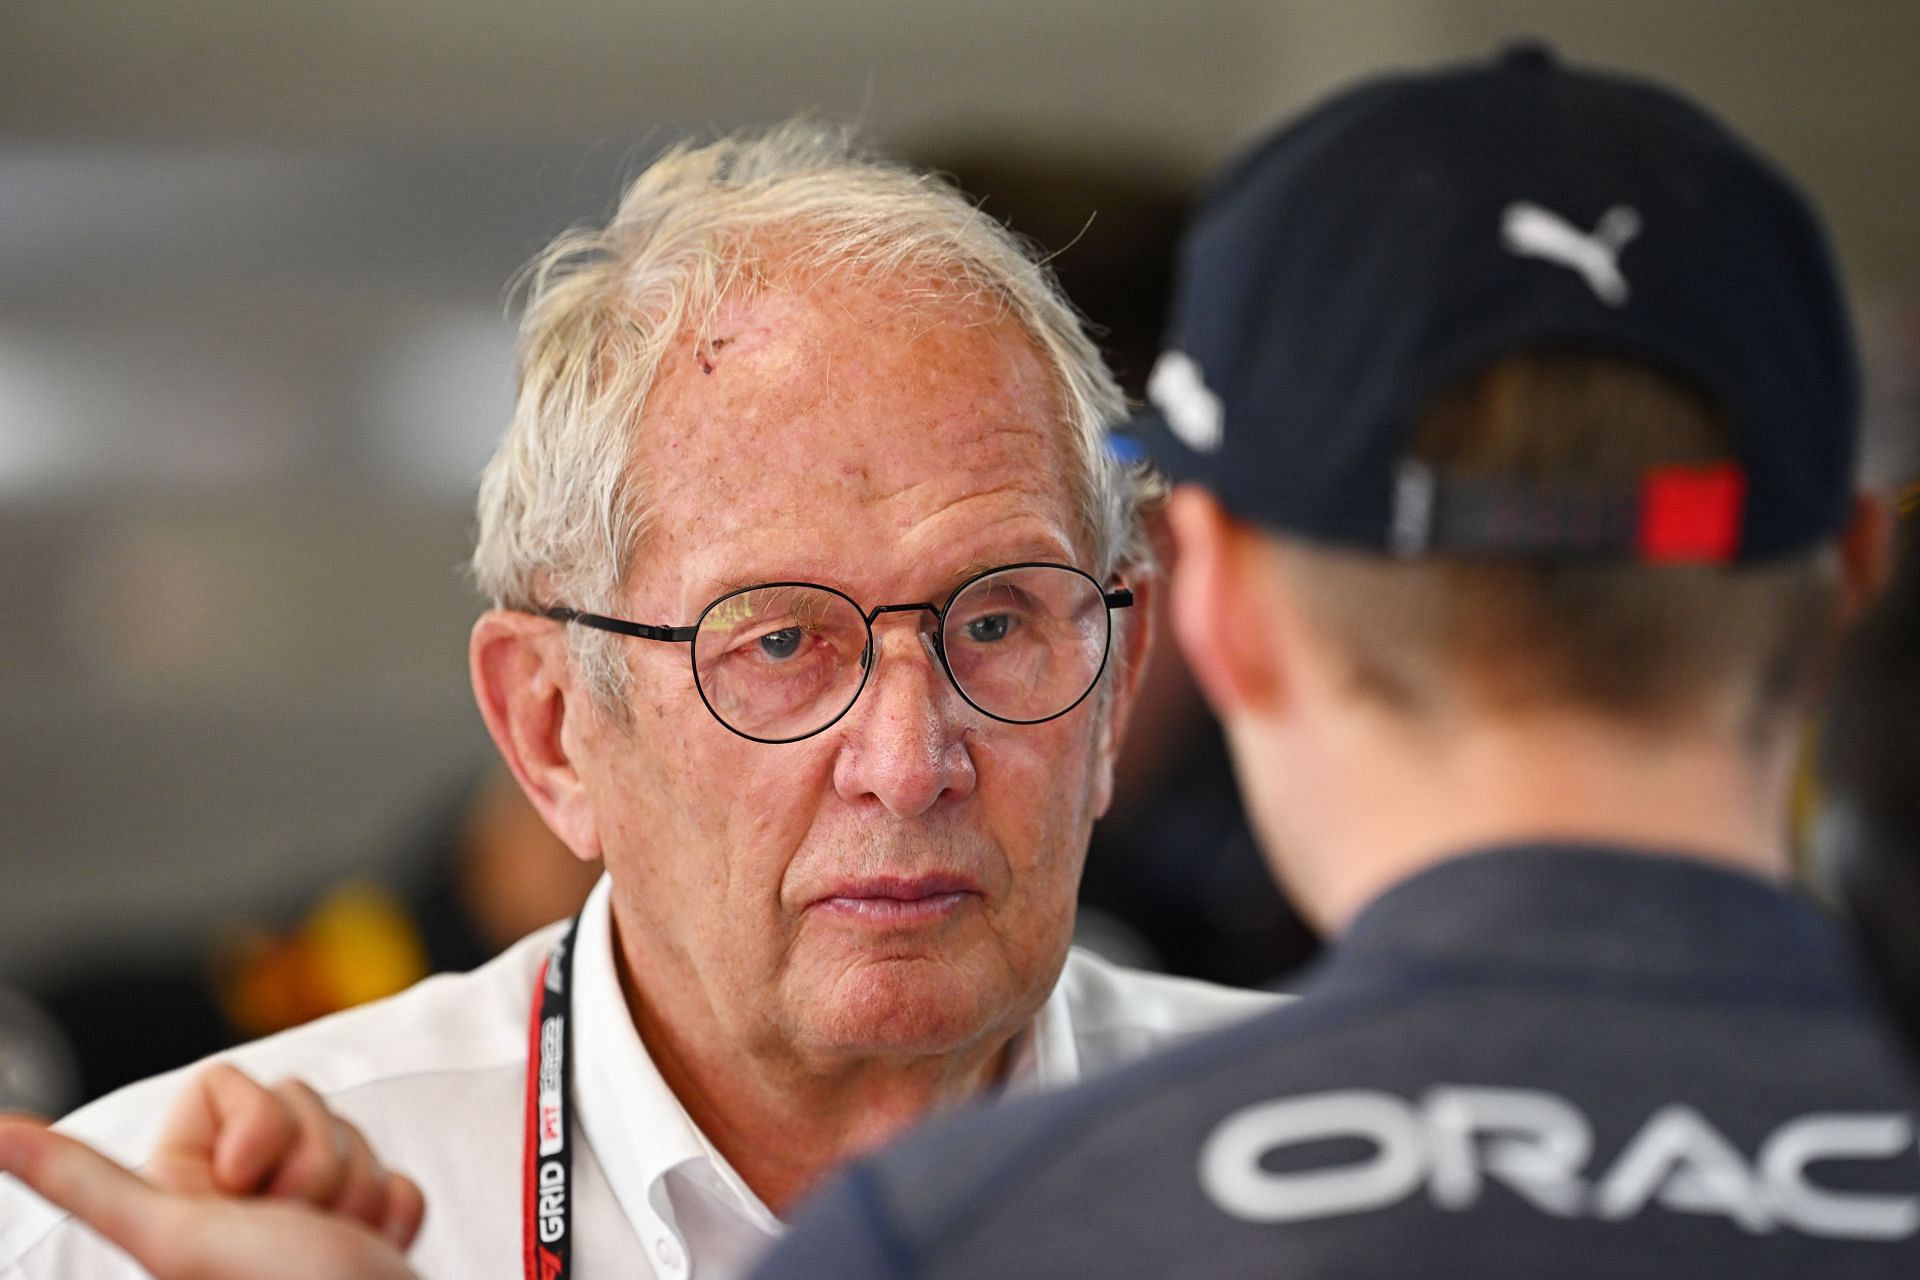 Helmut Marko talks to Max Verstappen (foreground) during the 2022 F1 Grand Prix of Spain - Final Practice